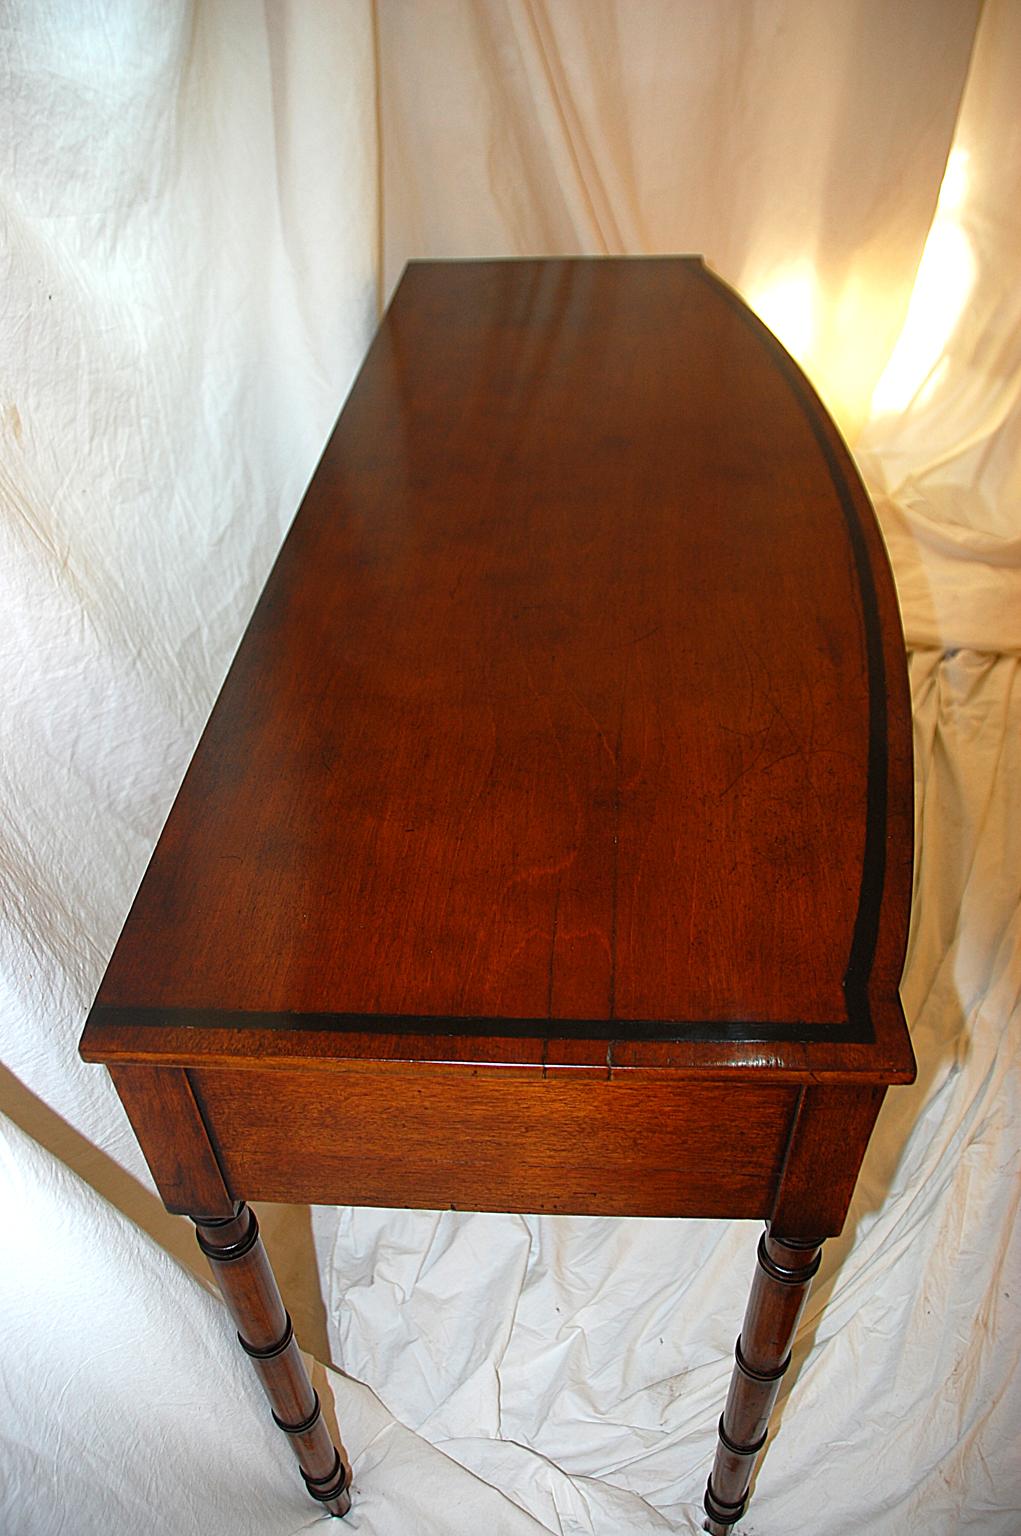 Inlay English Regency Period Mahogany Bowfront Inlaid Serving Table Ring Turned Legs